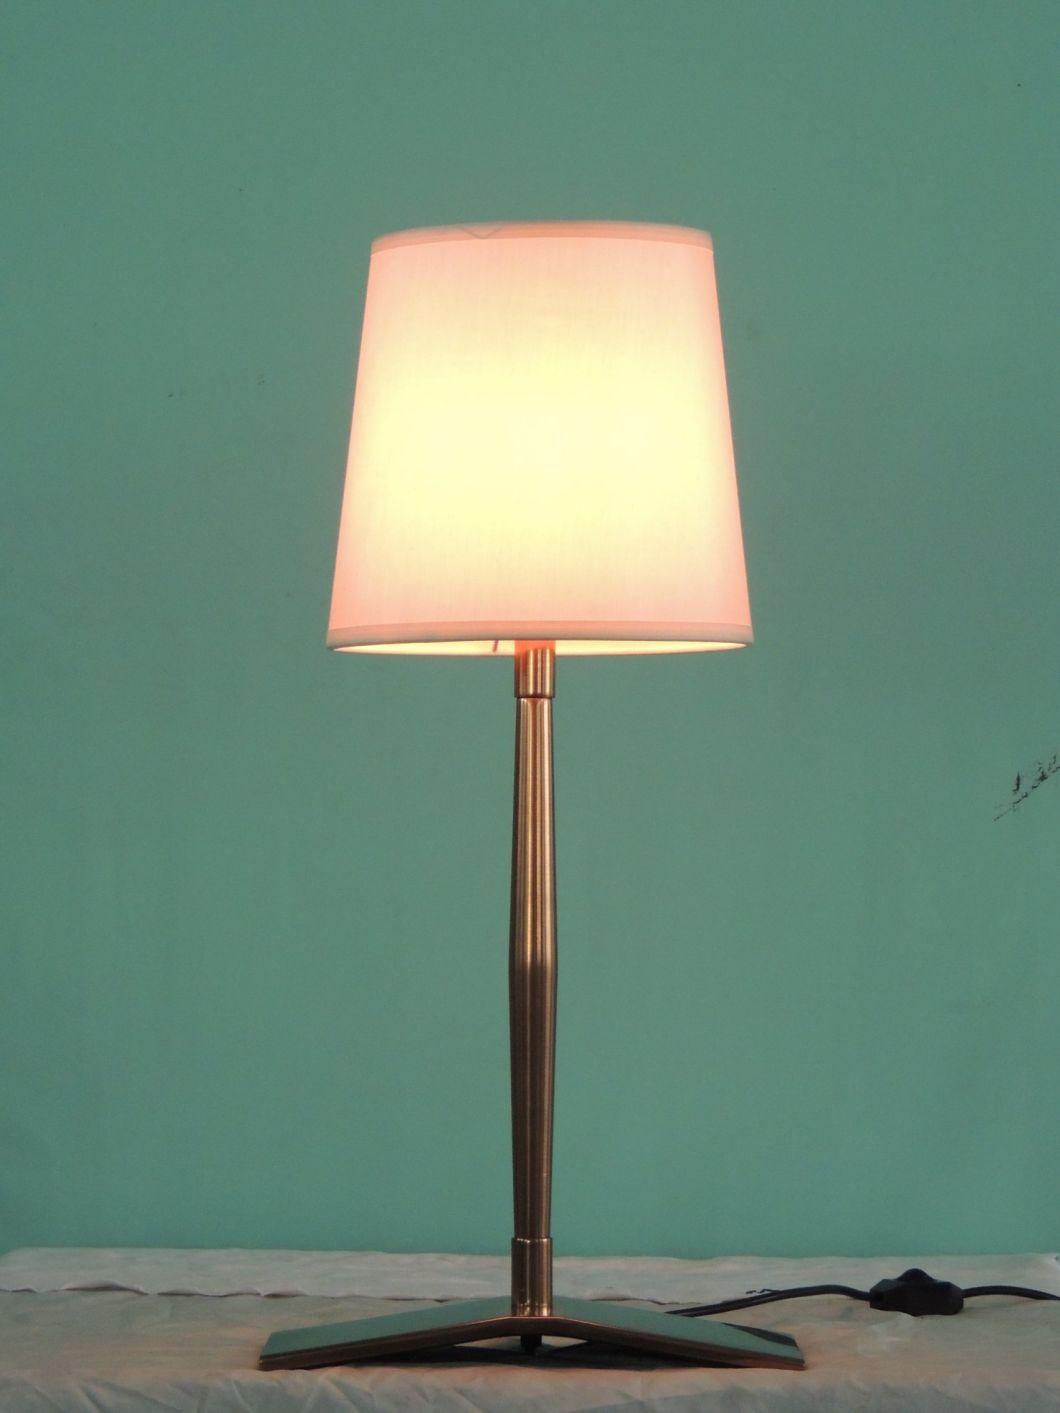 Metal Lamp Body in Copper Finish and White Fabric Lamp Shade Table Lamp.